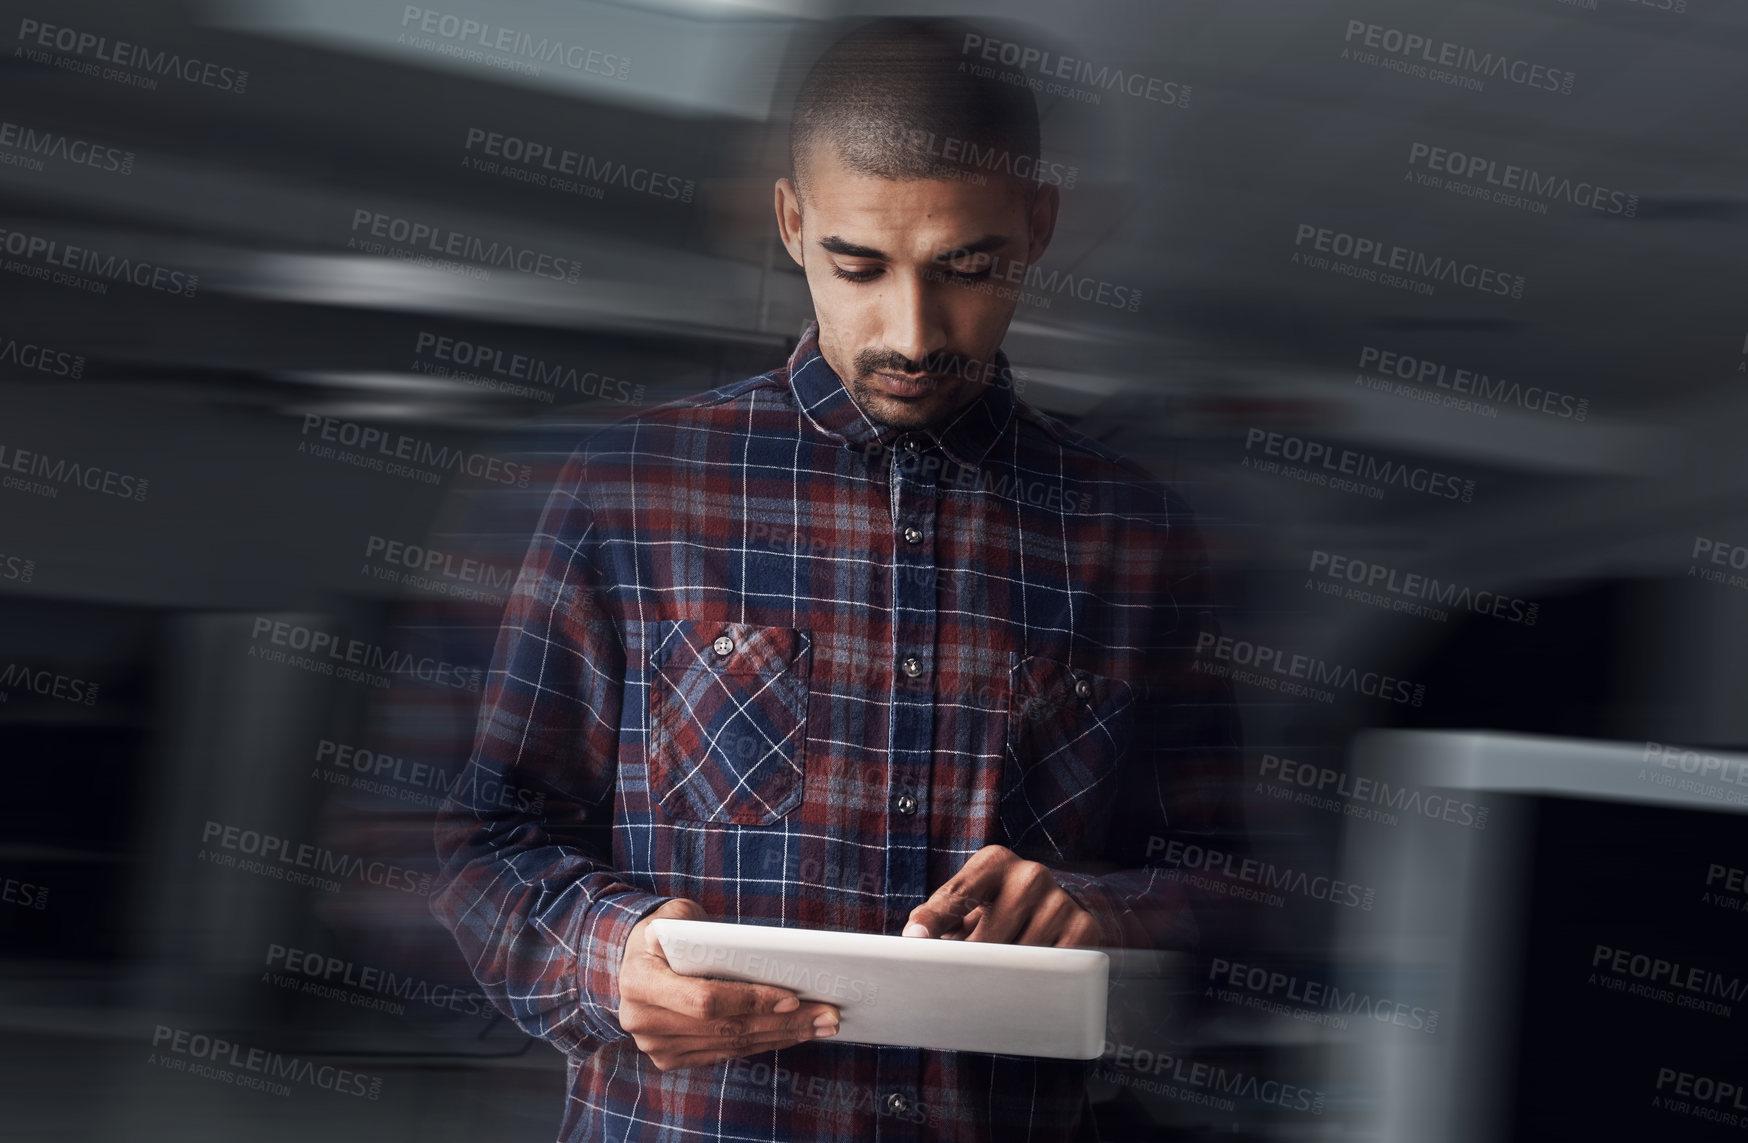 Buy stock photo Shot of a young entrepreneur working on a digital tablet in an office